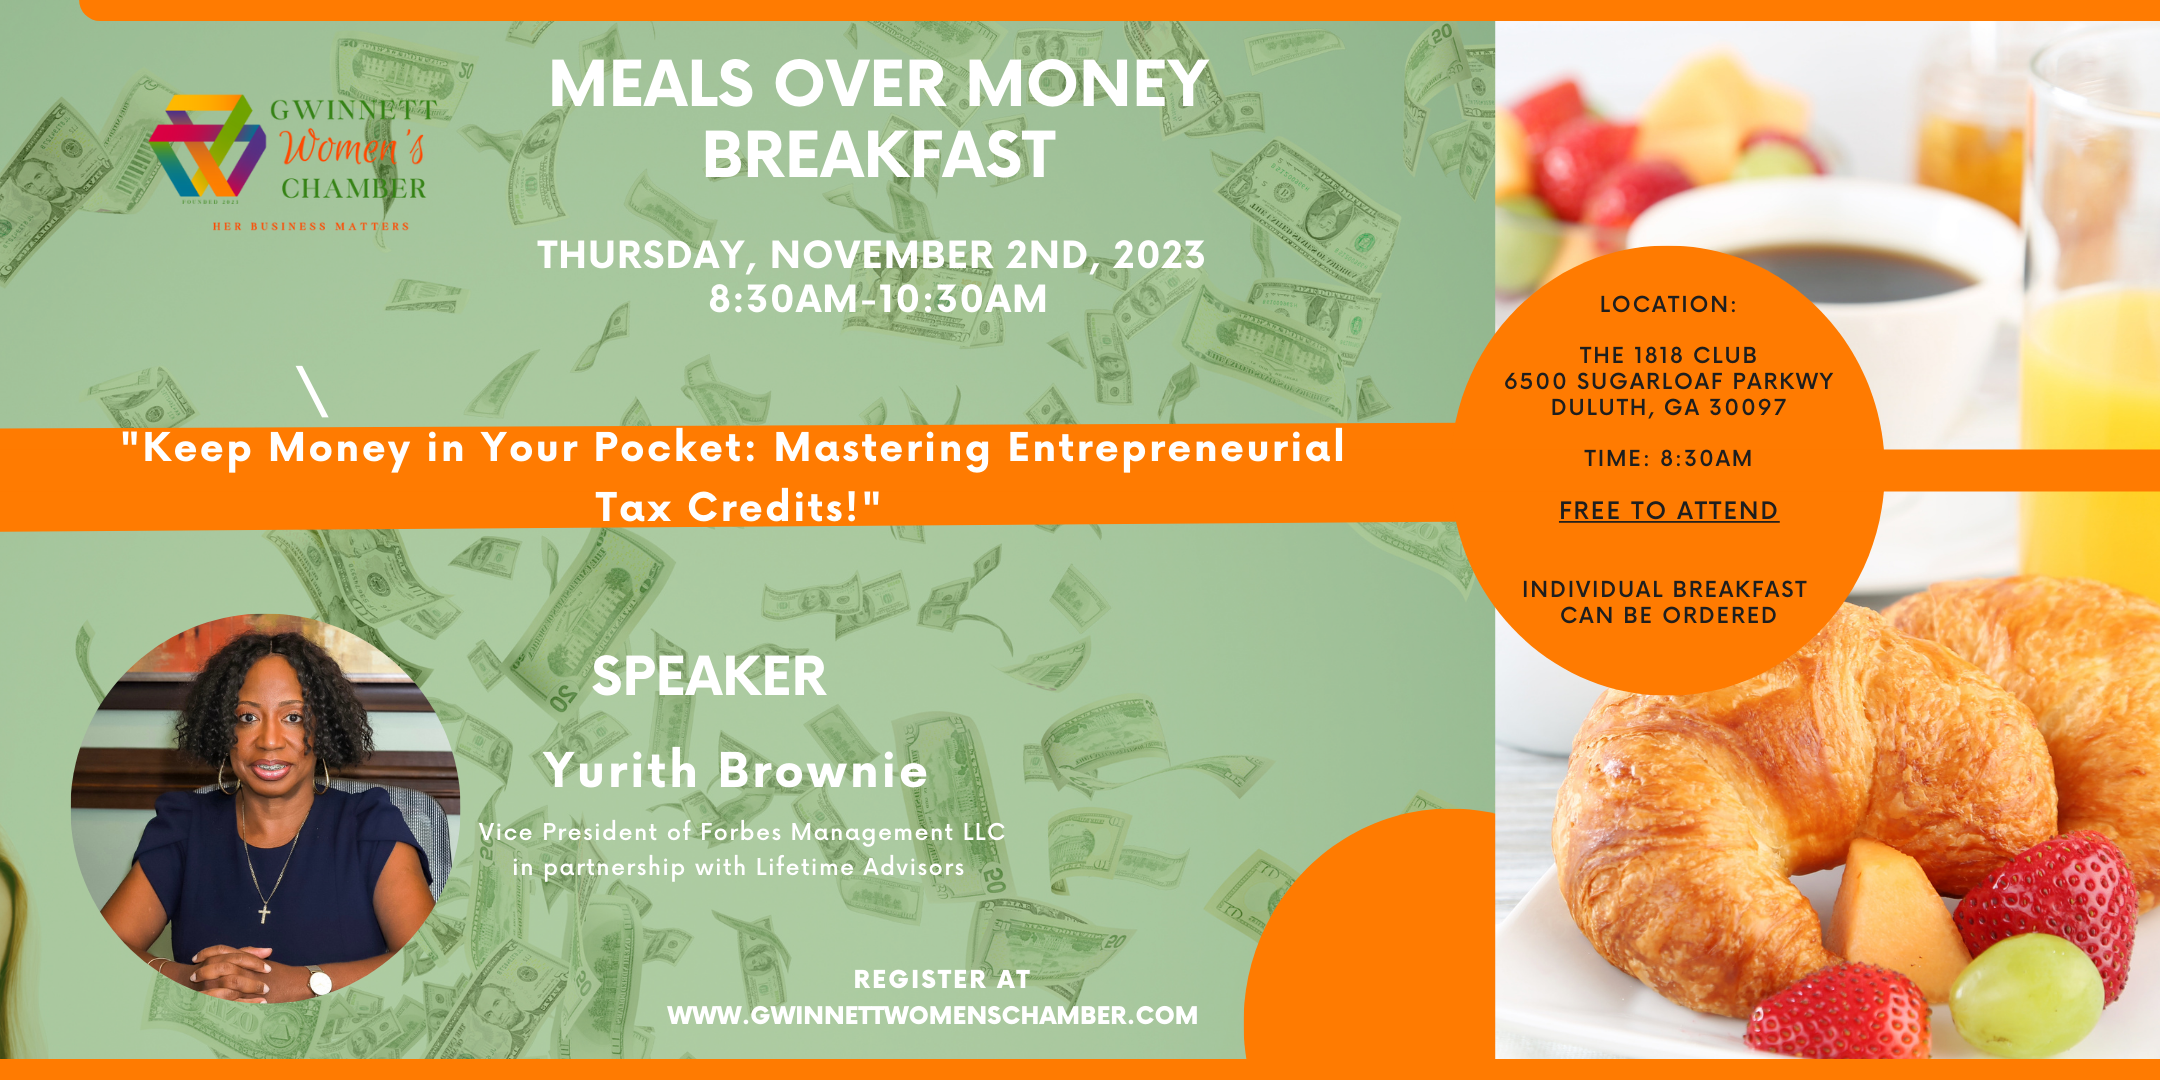 "Keep Money in Your Pocket: Mastering Entrepreneurial Tax Credits!"